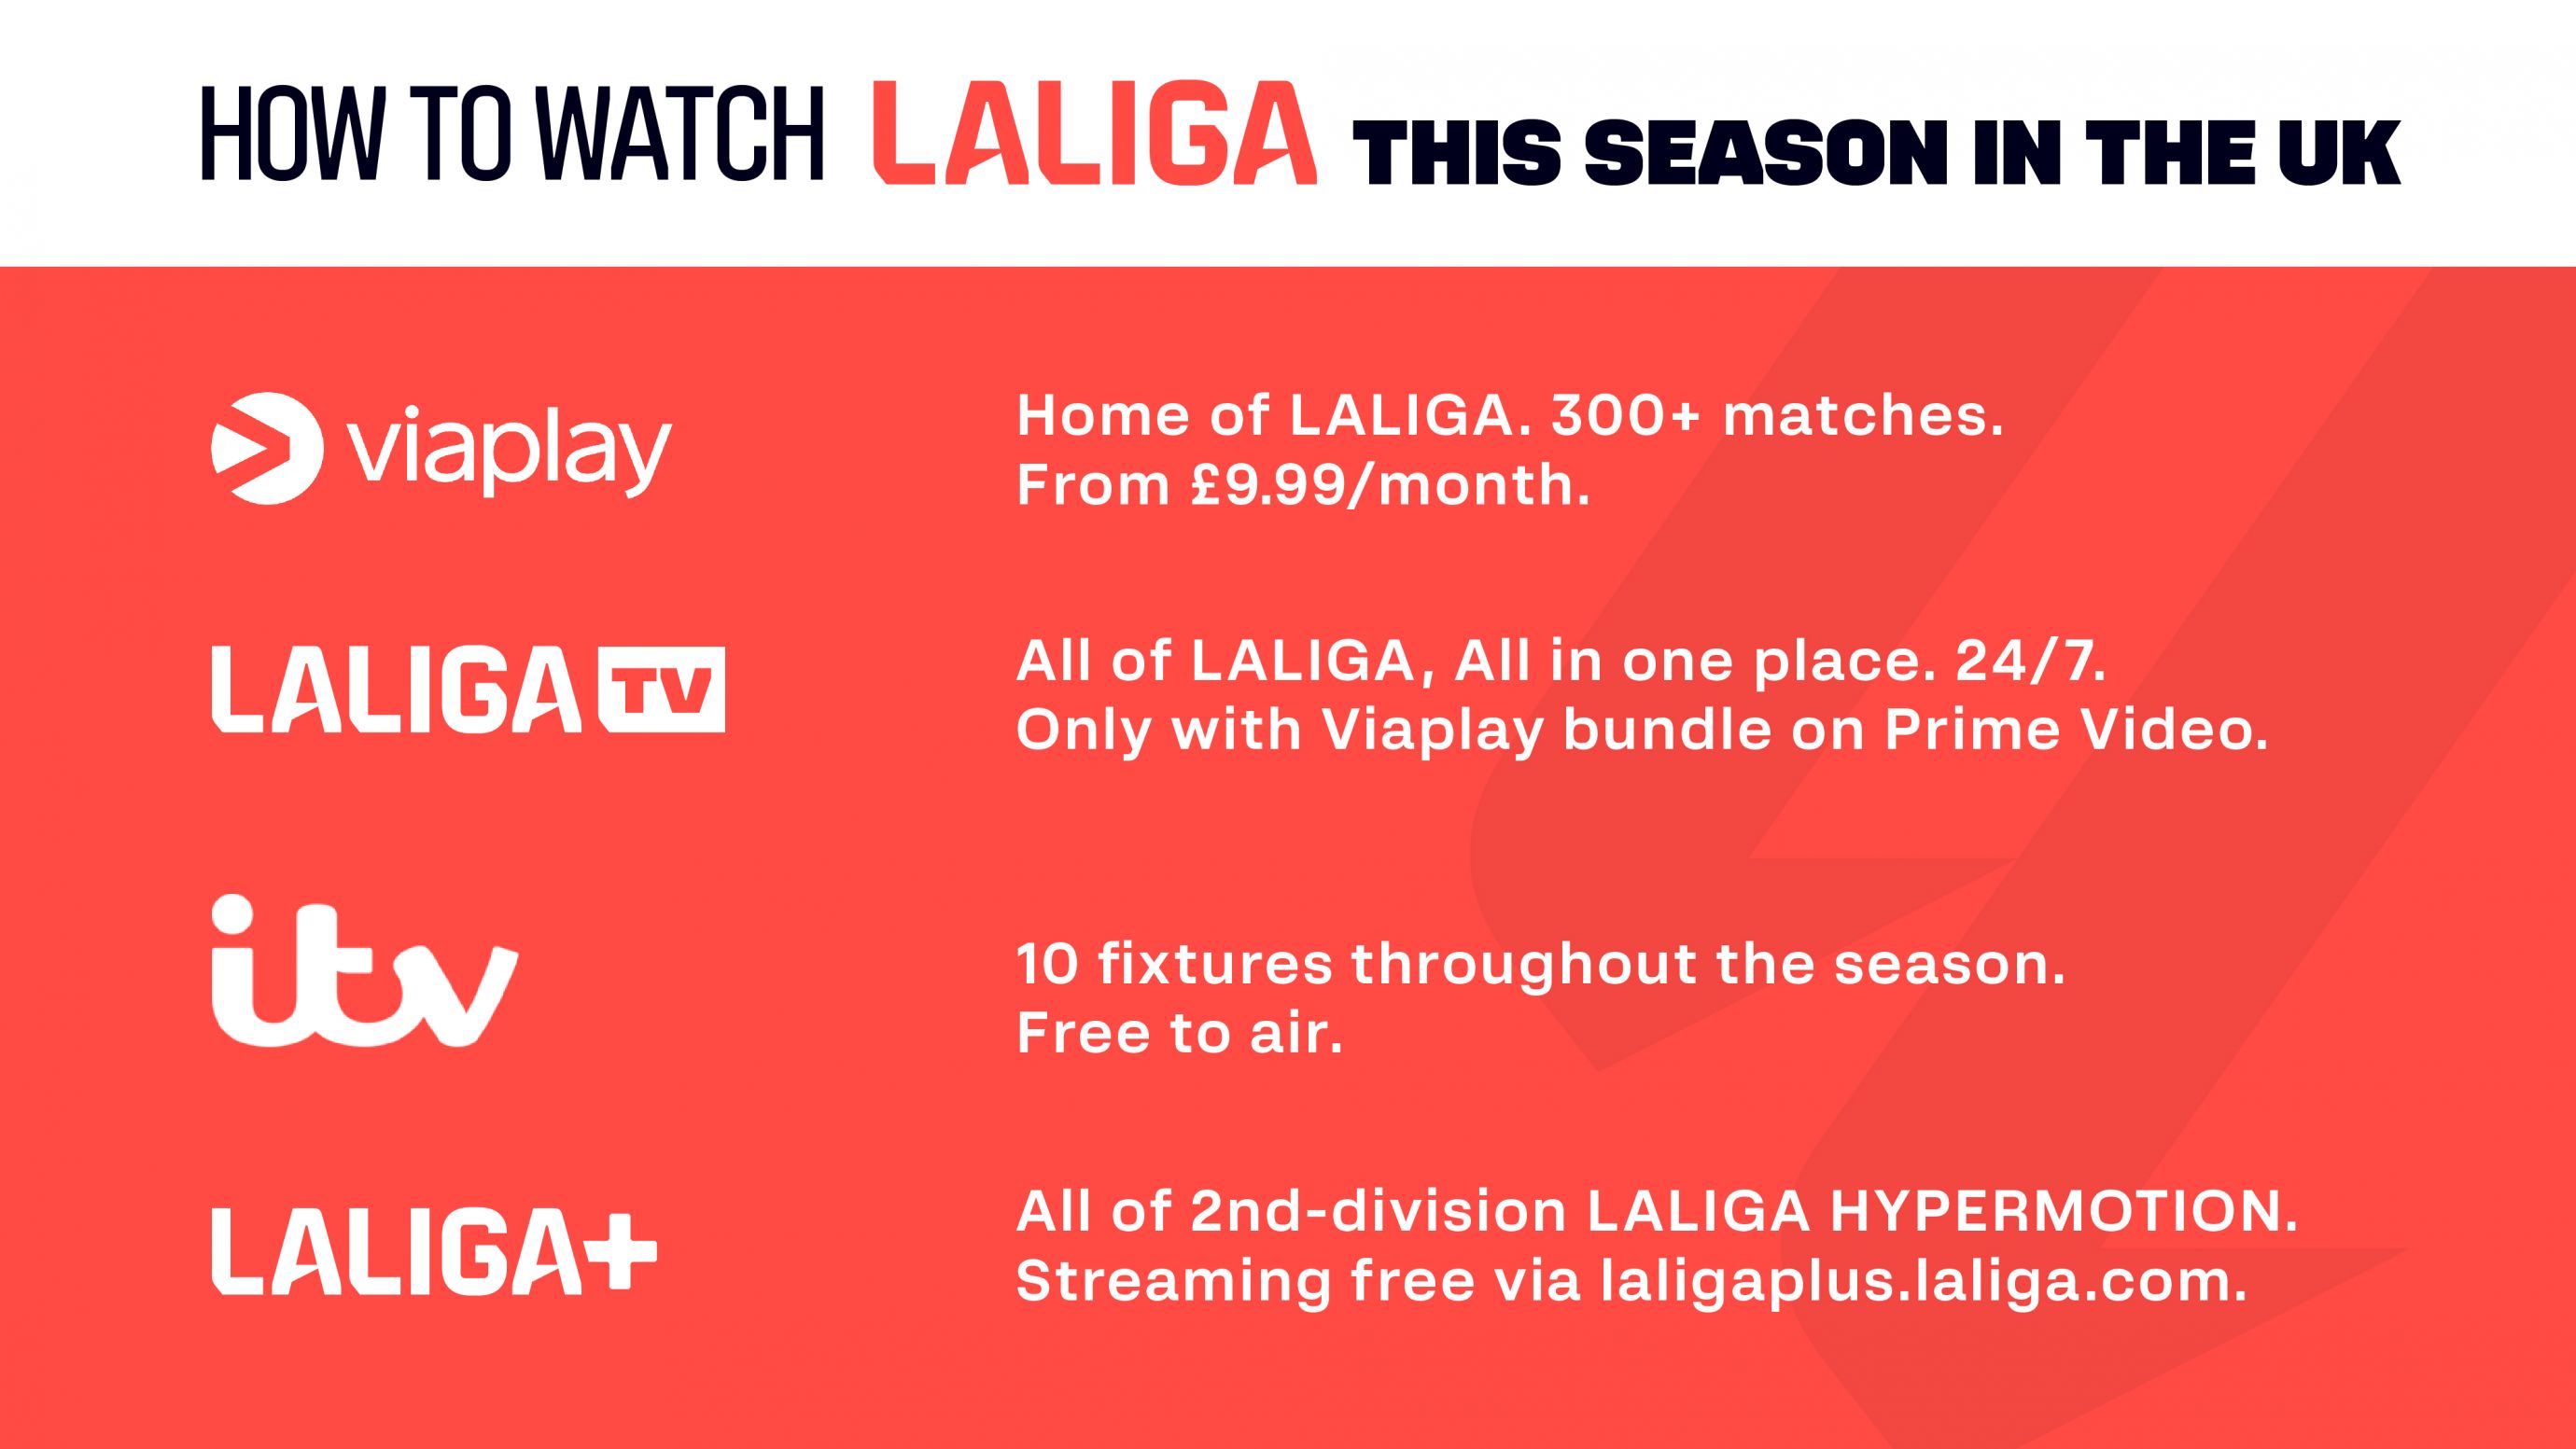 LALIGA is back with more ways than ever for UK fans to enjoy the very best of Spanish fútbol LALIGA